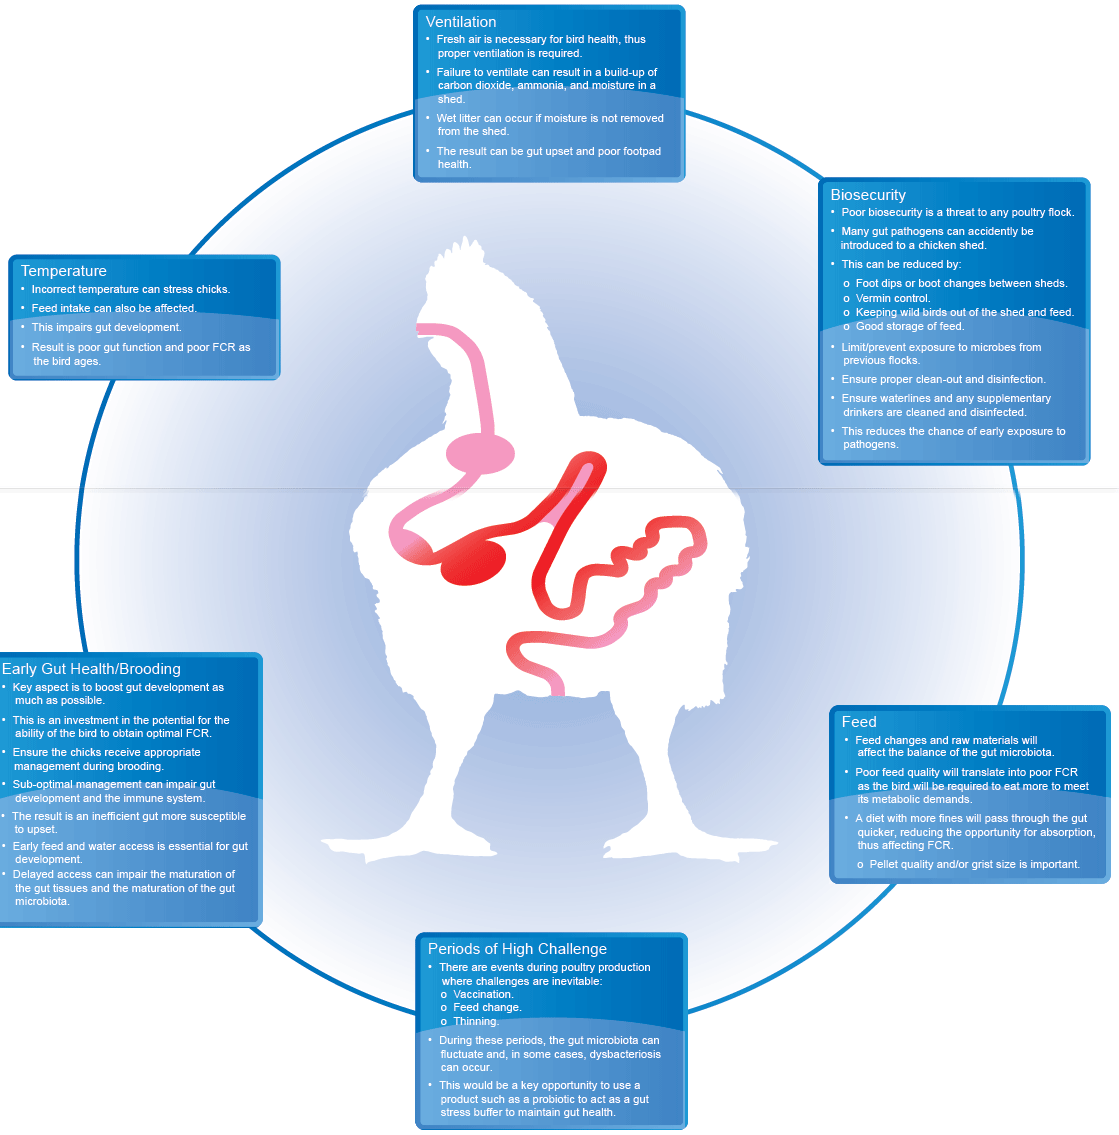 Gut Health in Poultry - The World Within - Image 11